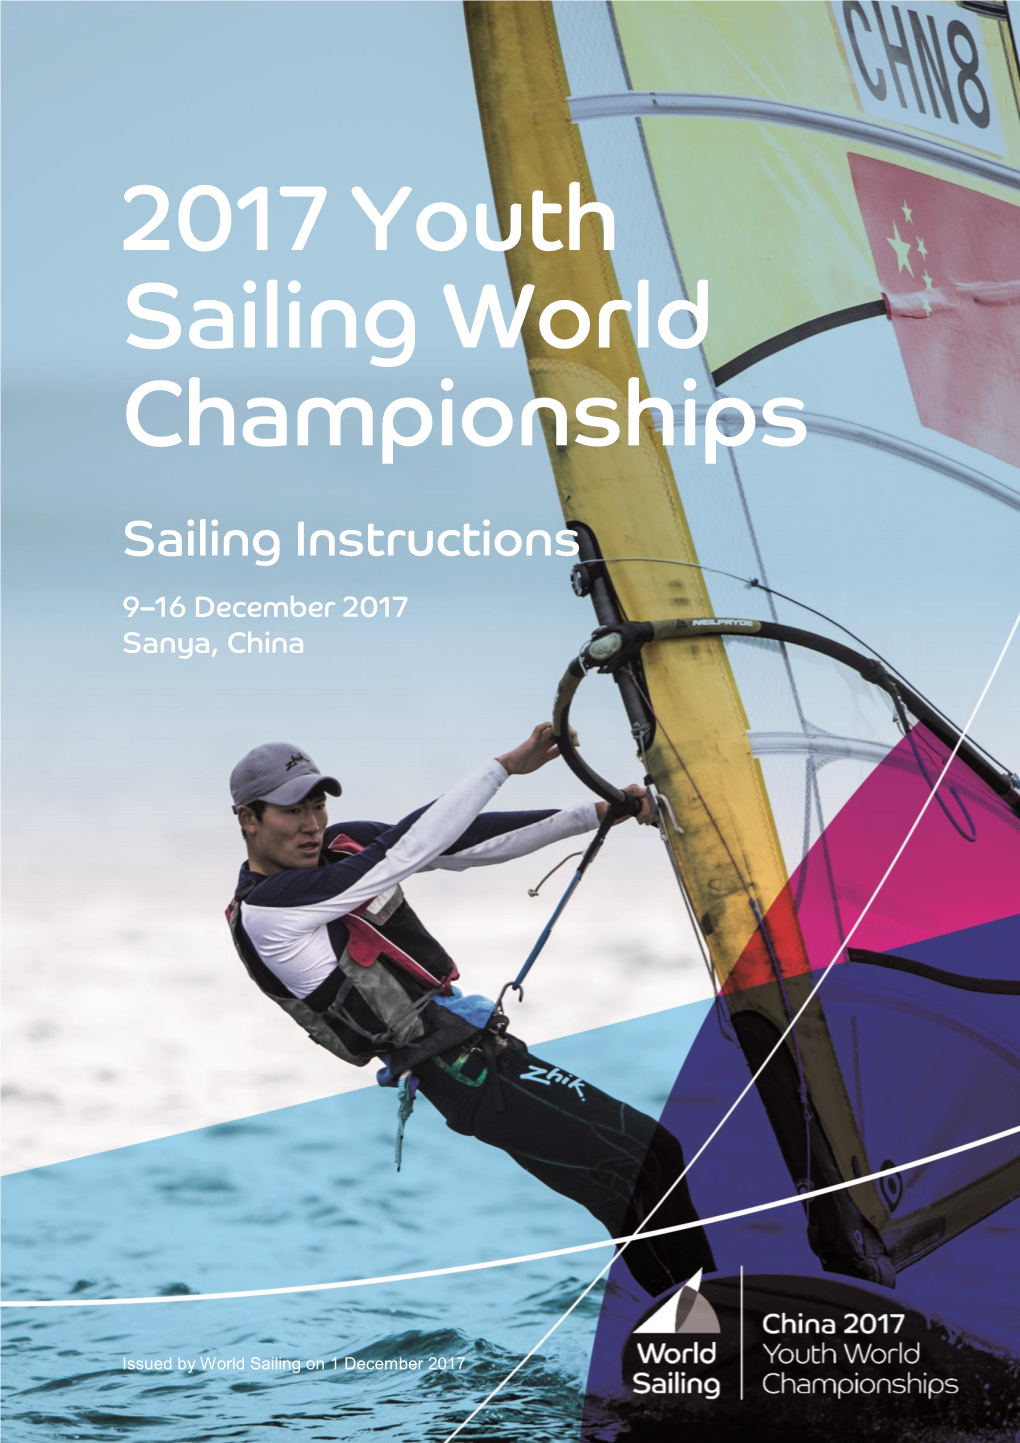 The Sailing Instructions